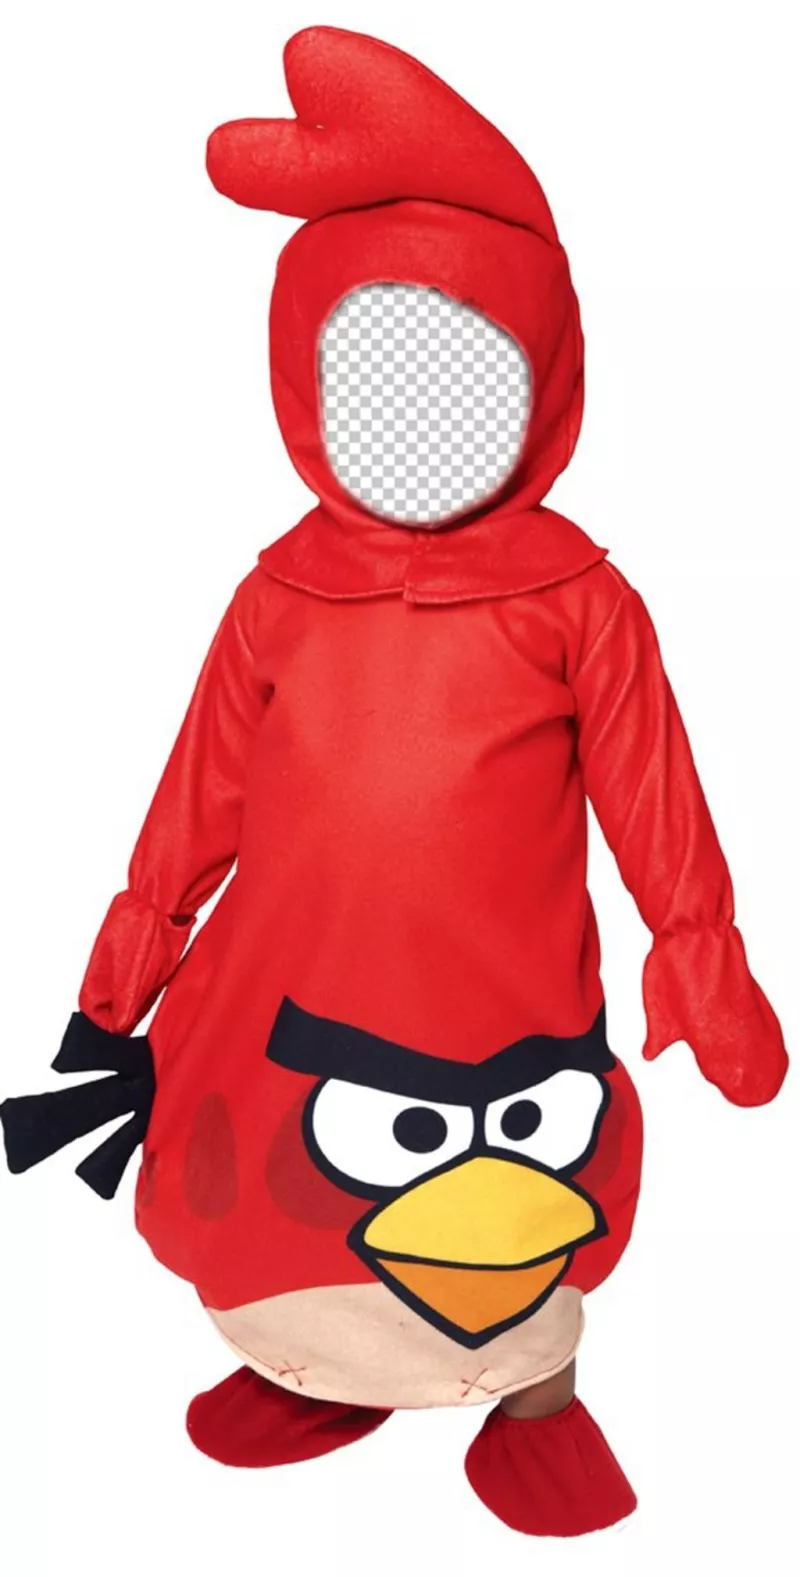 Create a fun photomontage of an Angry Bird costume to put a face ..